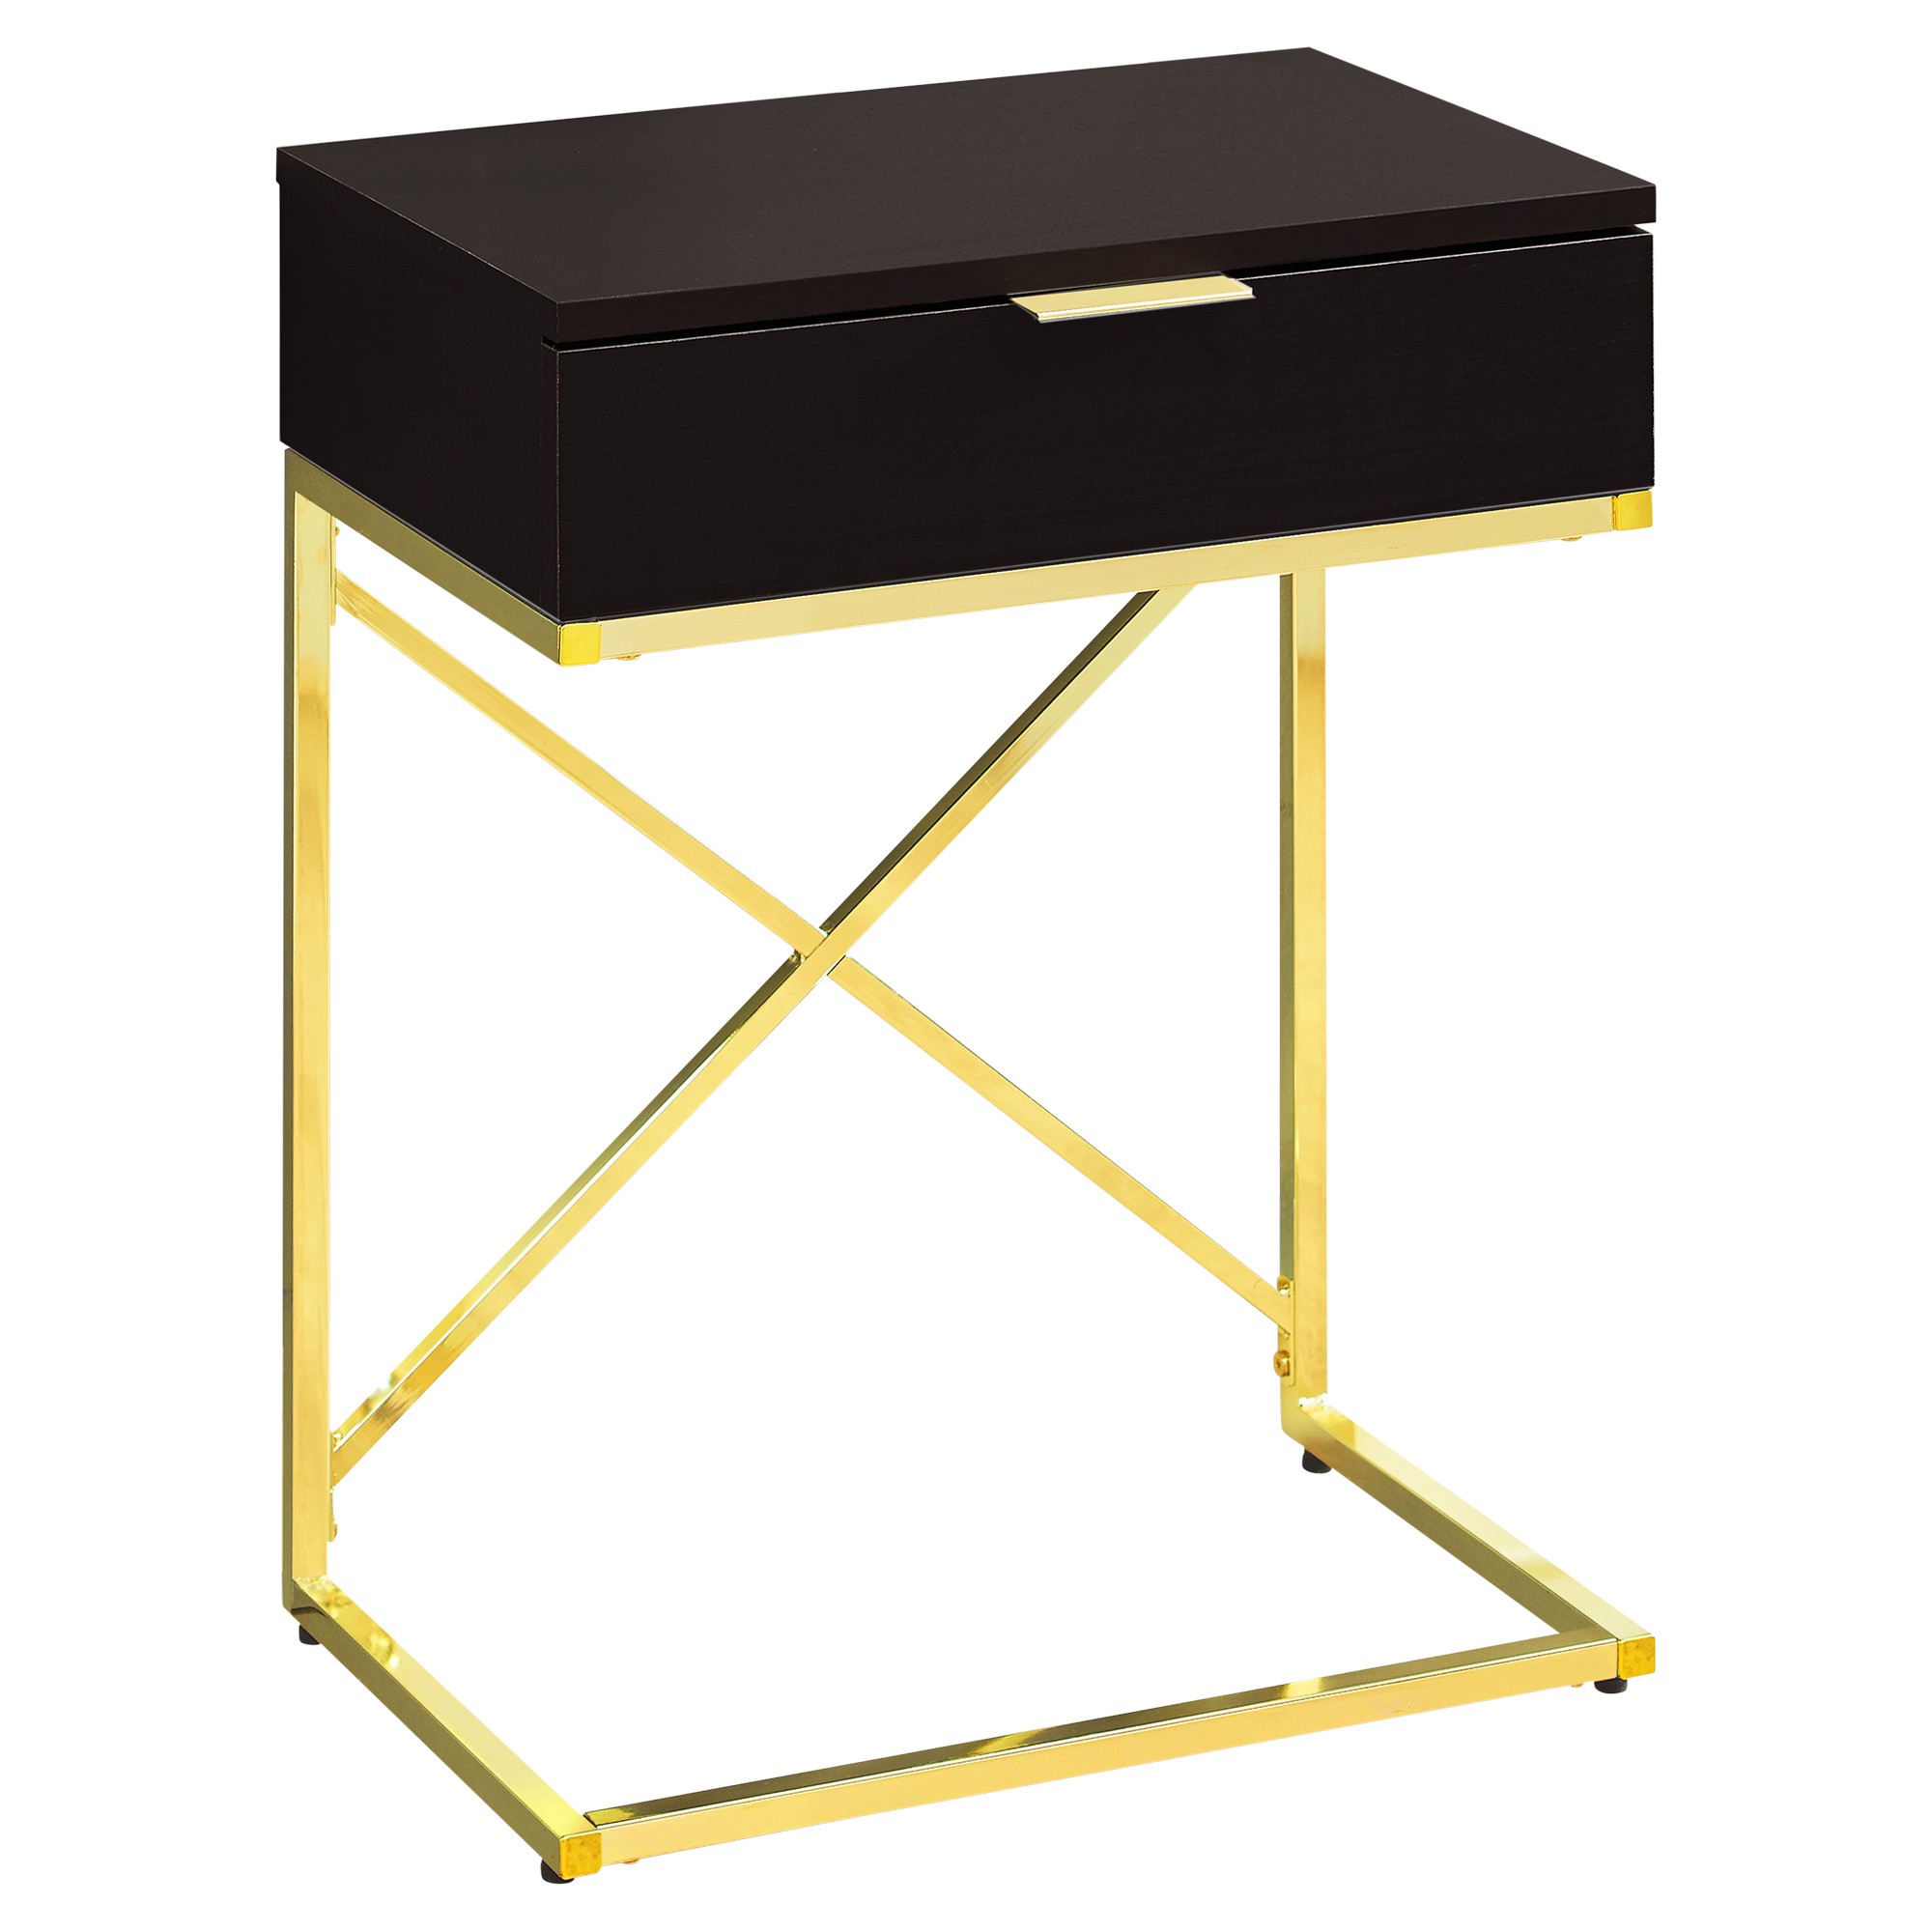 18.2" x 12.8" x 23.5" Cappuccino Finish Gold Metal Accent Table